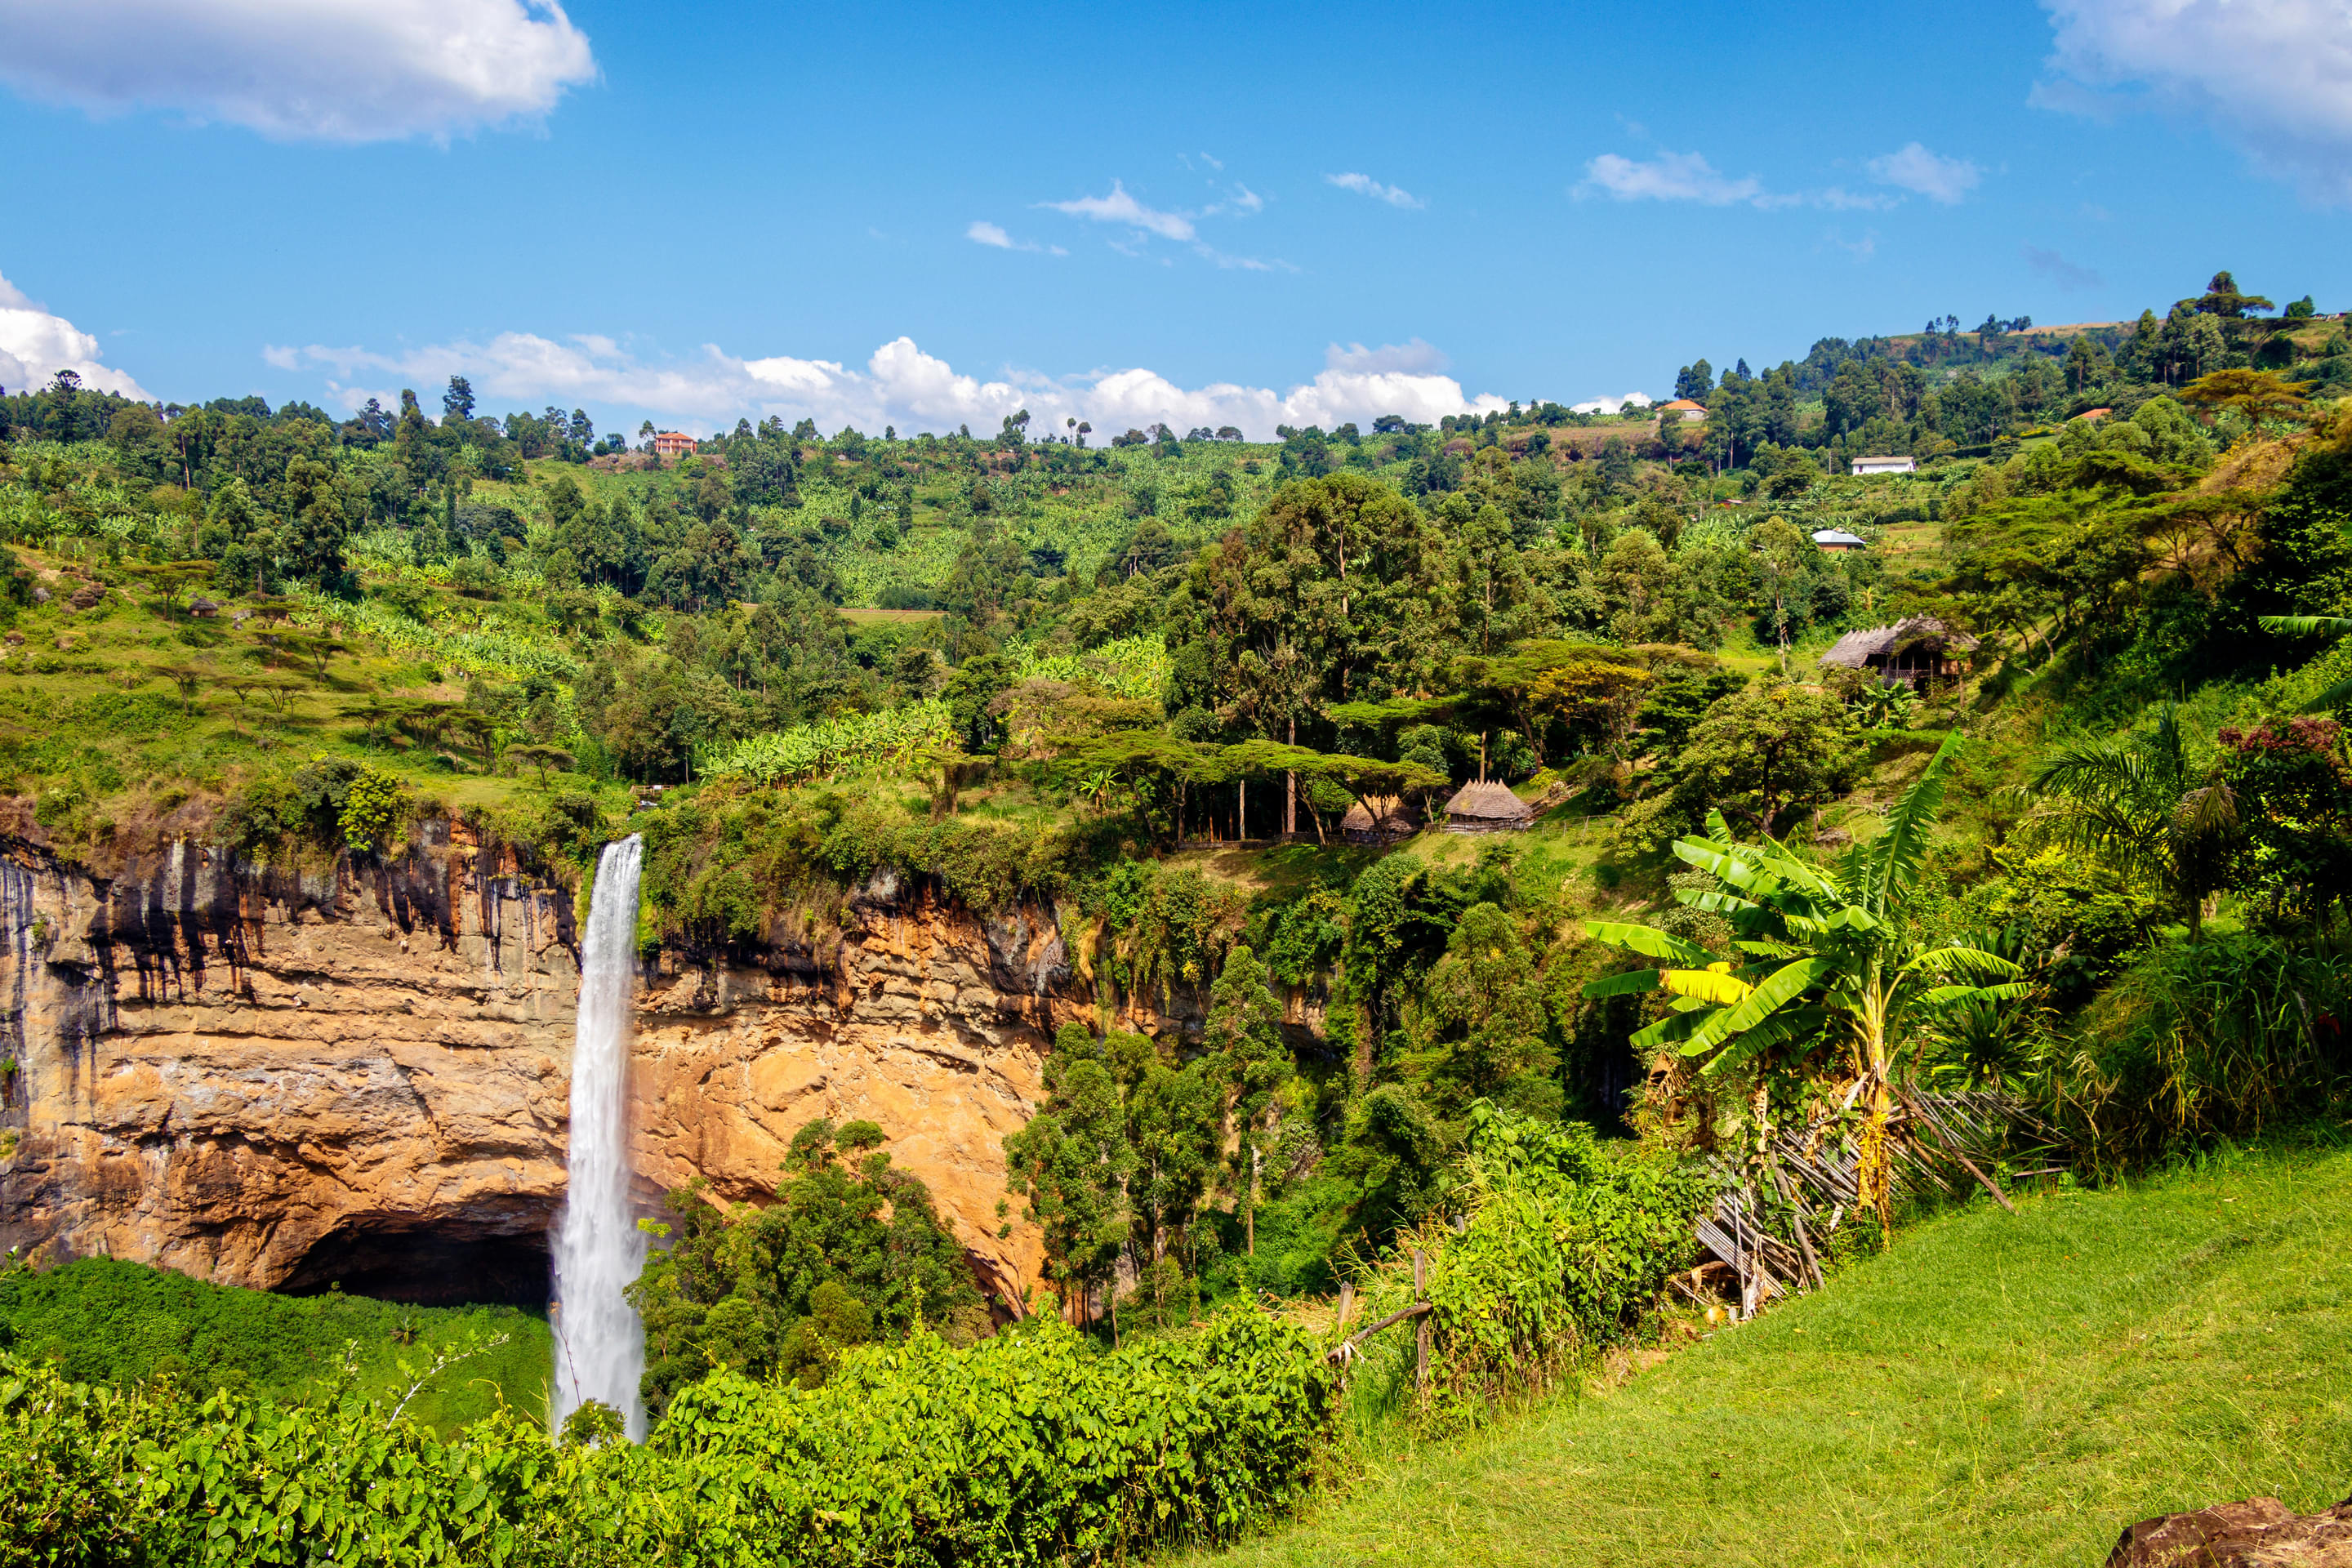 Sipi Falls Overview